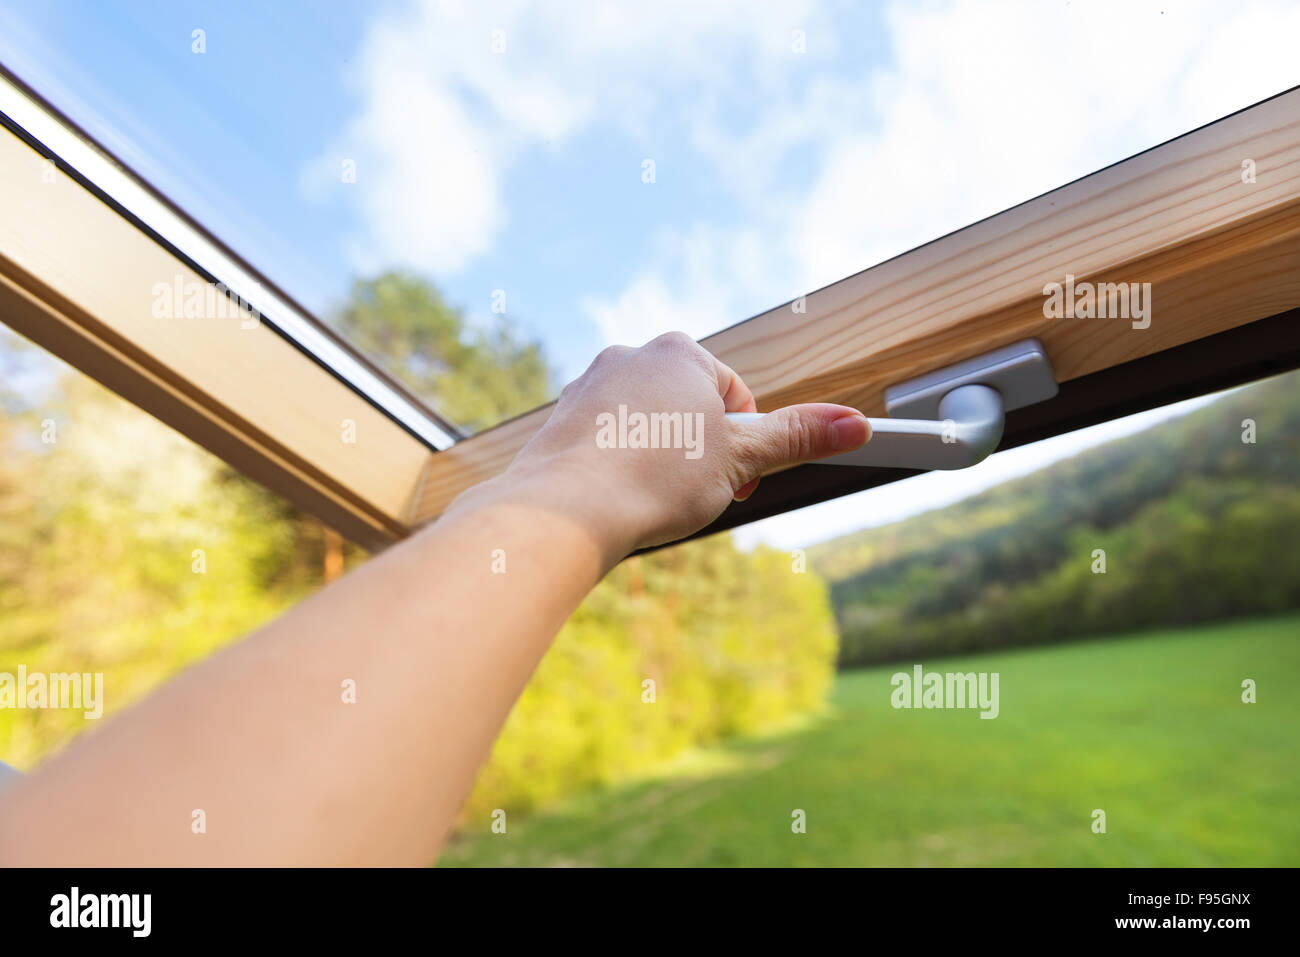 Beautiful nature view through roof skylight window in attic room. Stock Photo